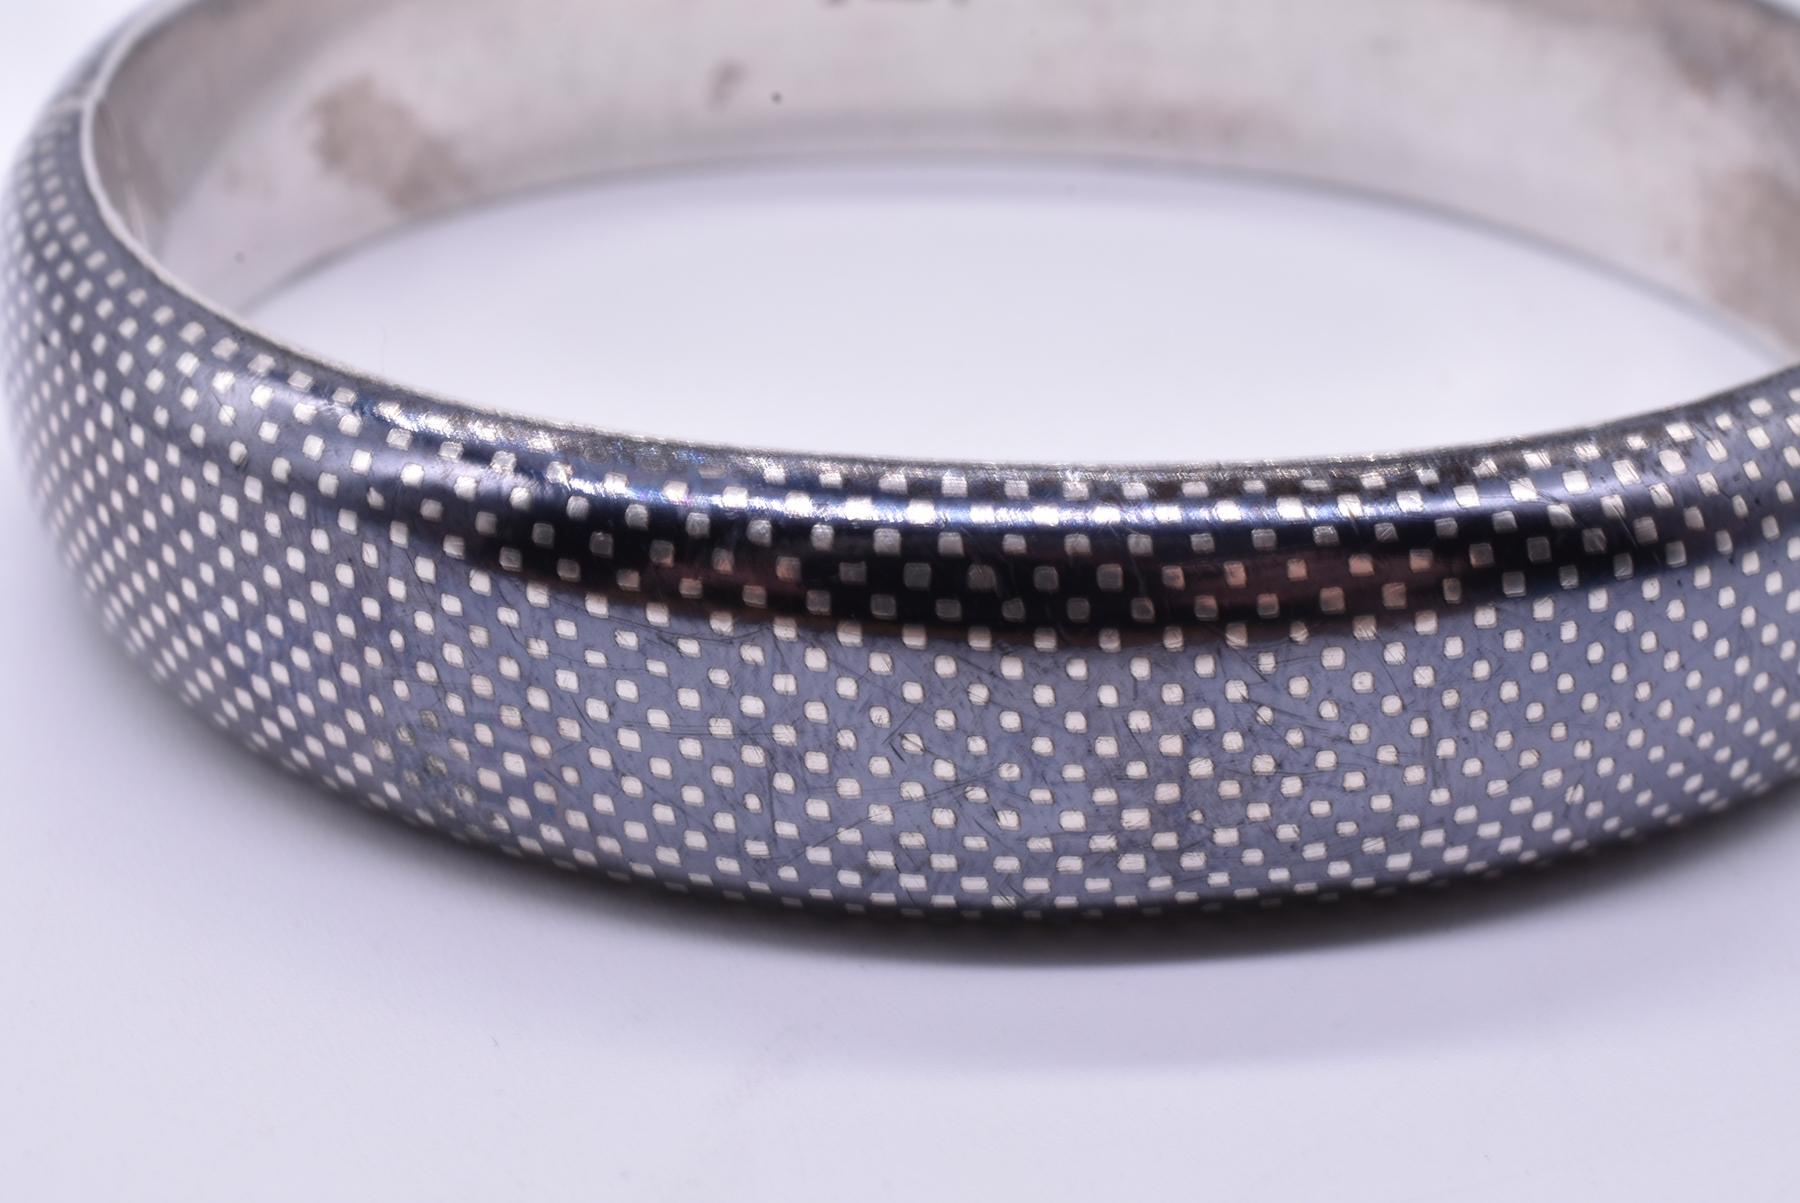 This design work on our Victorian bangle, with its very classic geometric pattern of small dots, is referred to as 